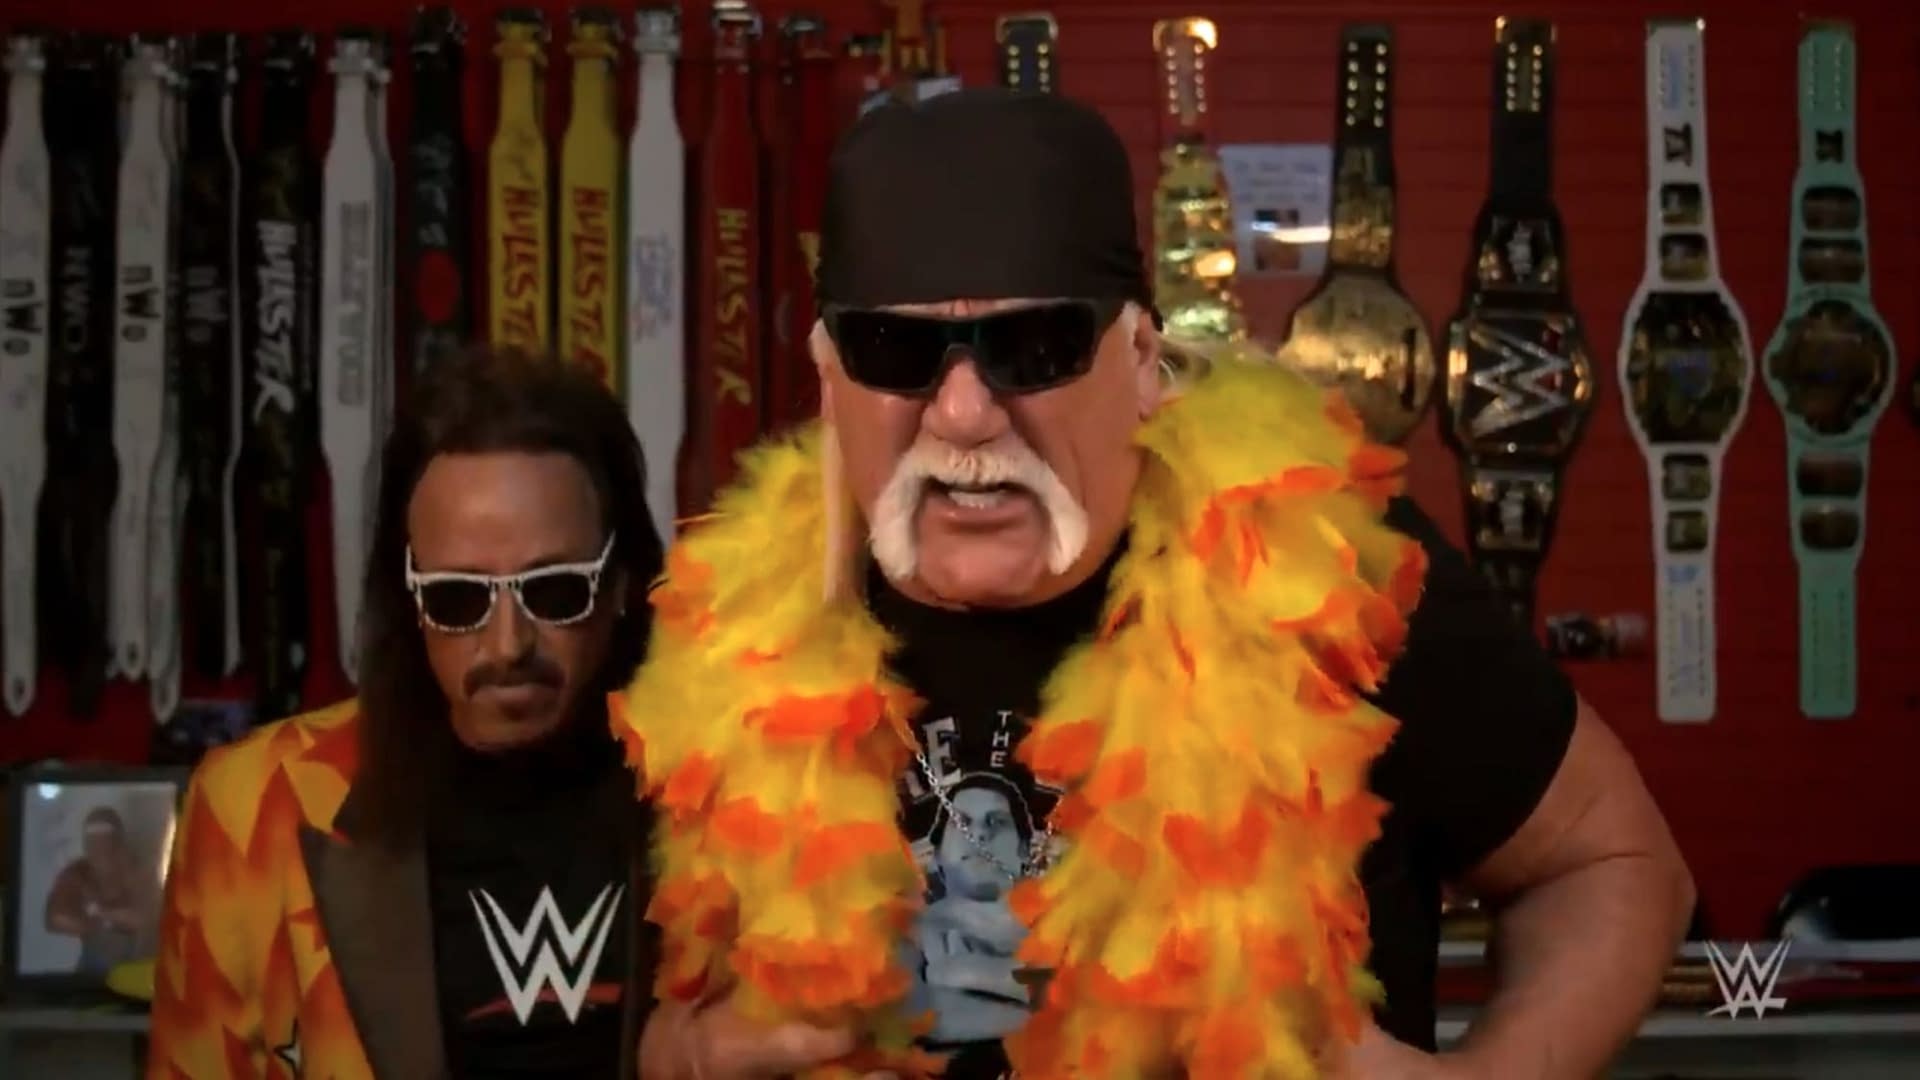 Sorg bunke Pine Smackdown Video Clips Roll the Dice with "Uncut" Hulk Hogan Promo